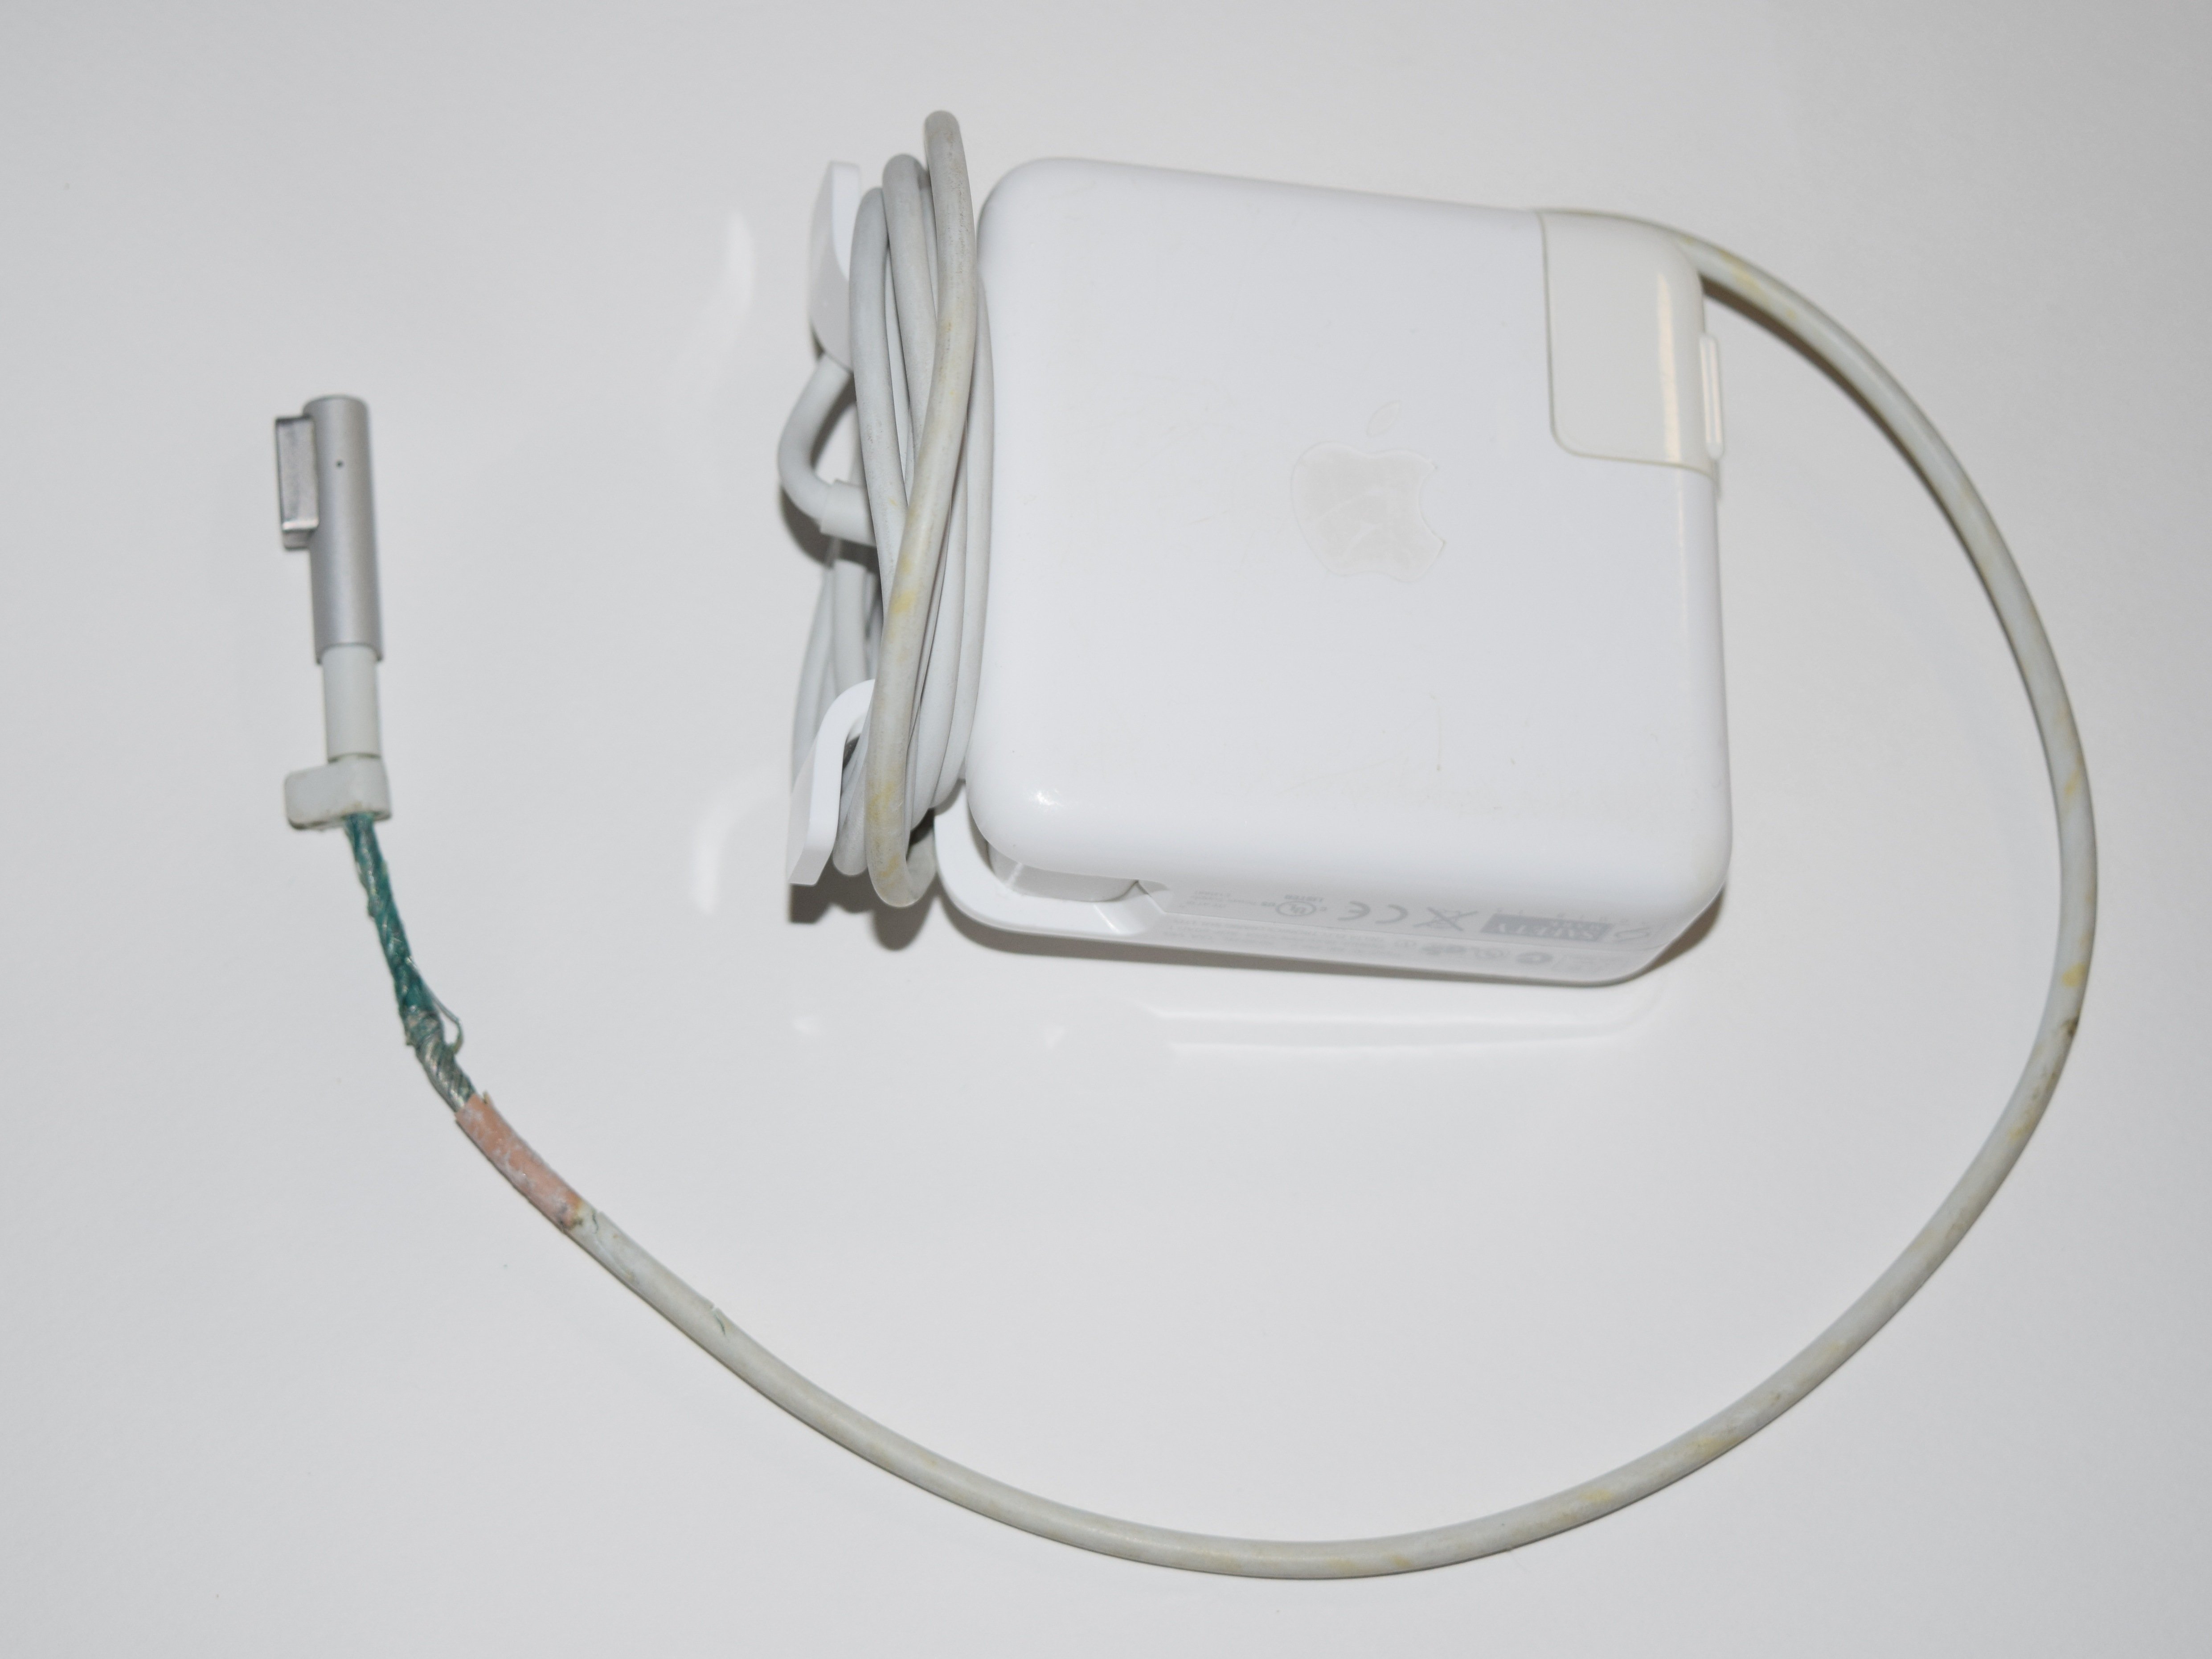 How to Fix a Frayed Mac Charger and Prevent Future Damage 5